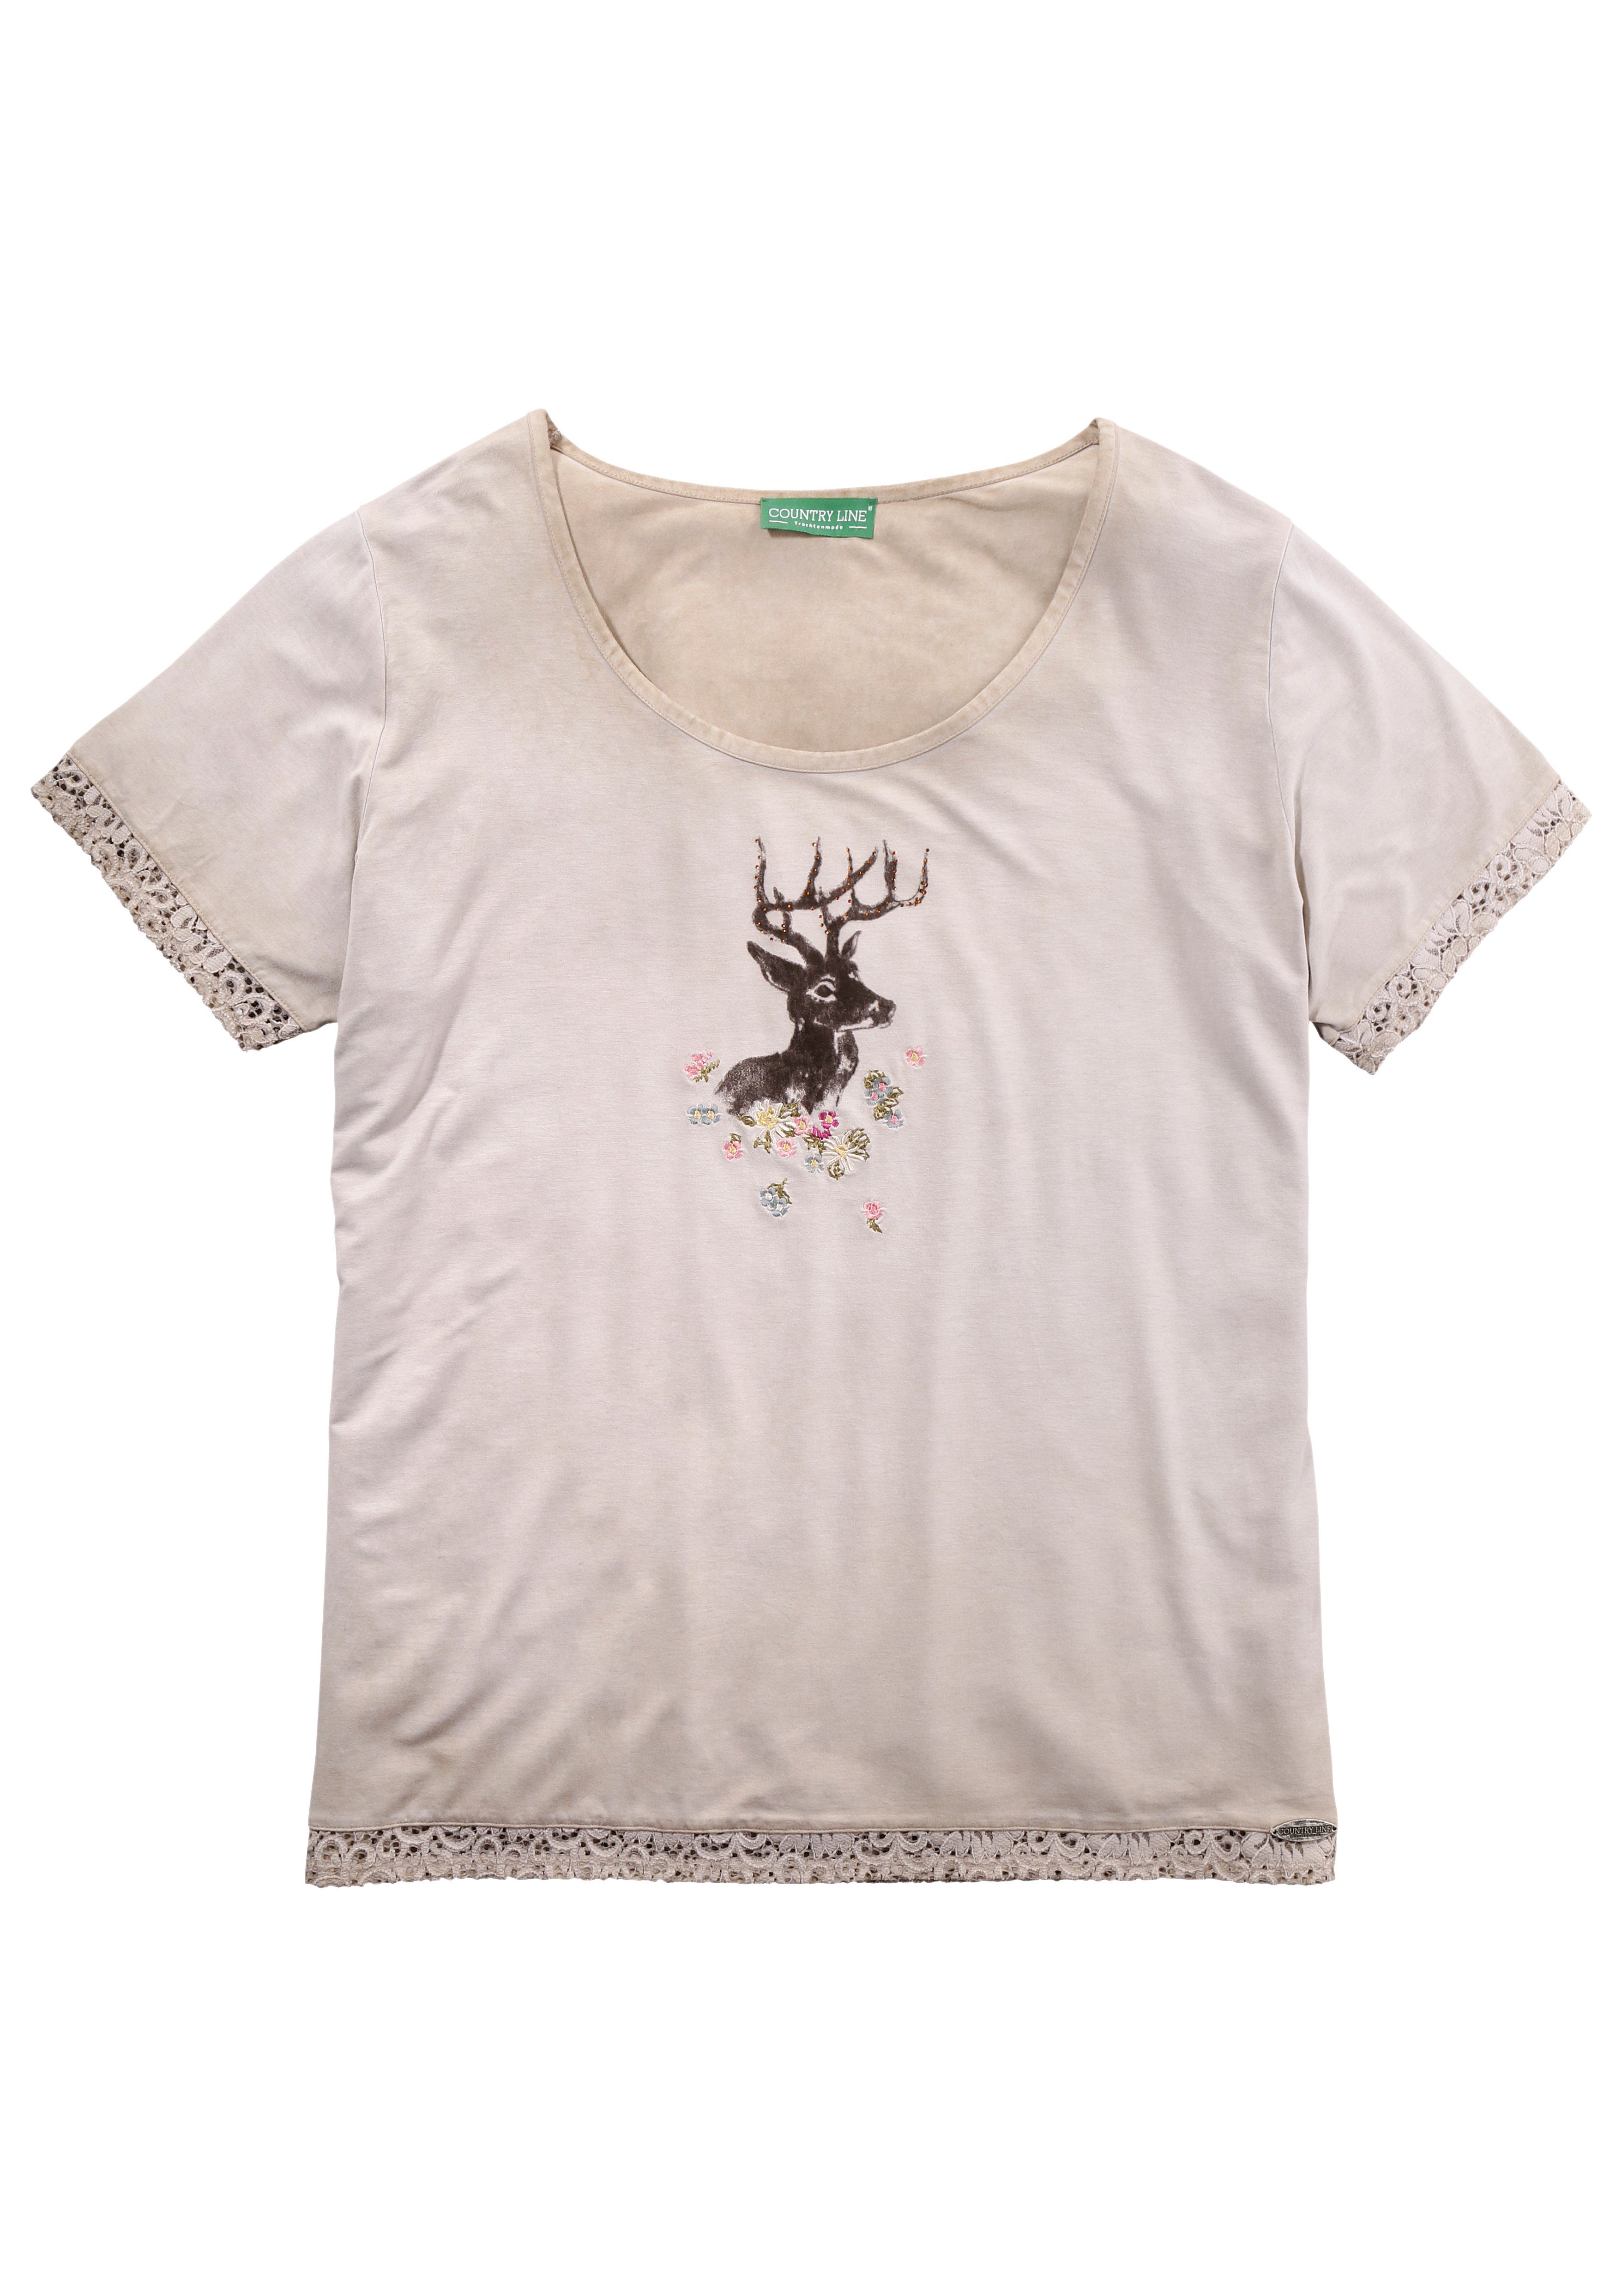 Otto - Country Line NU 15% KORTING: Country Line folkloreshirt voor dames, in casual used-look